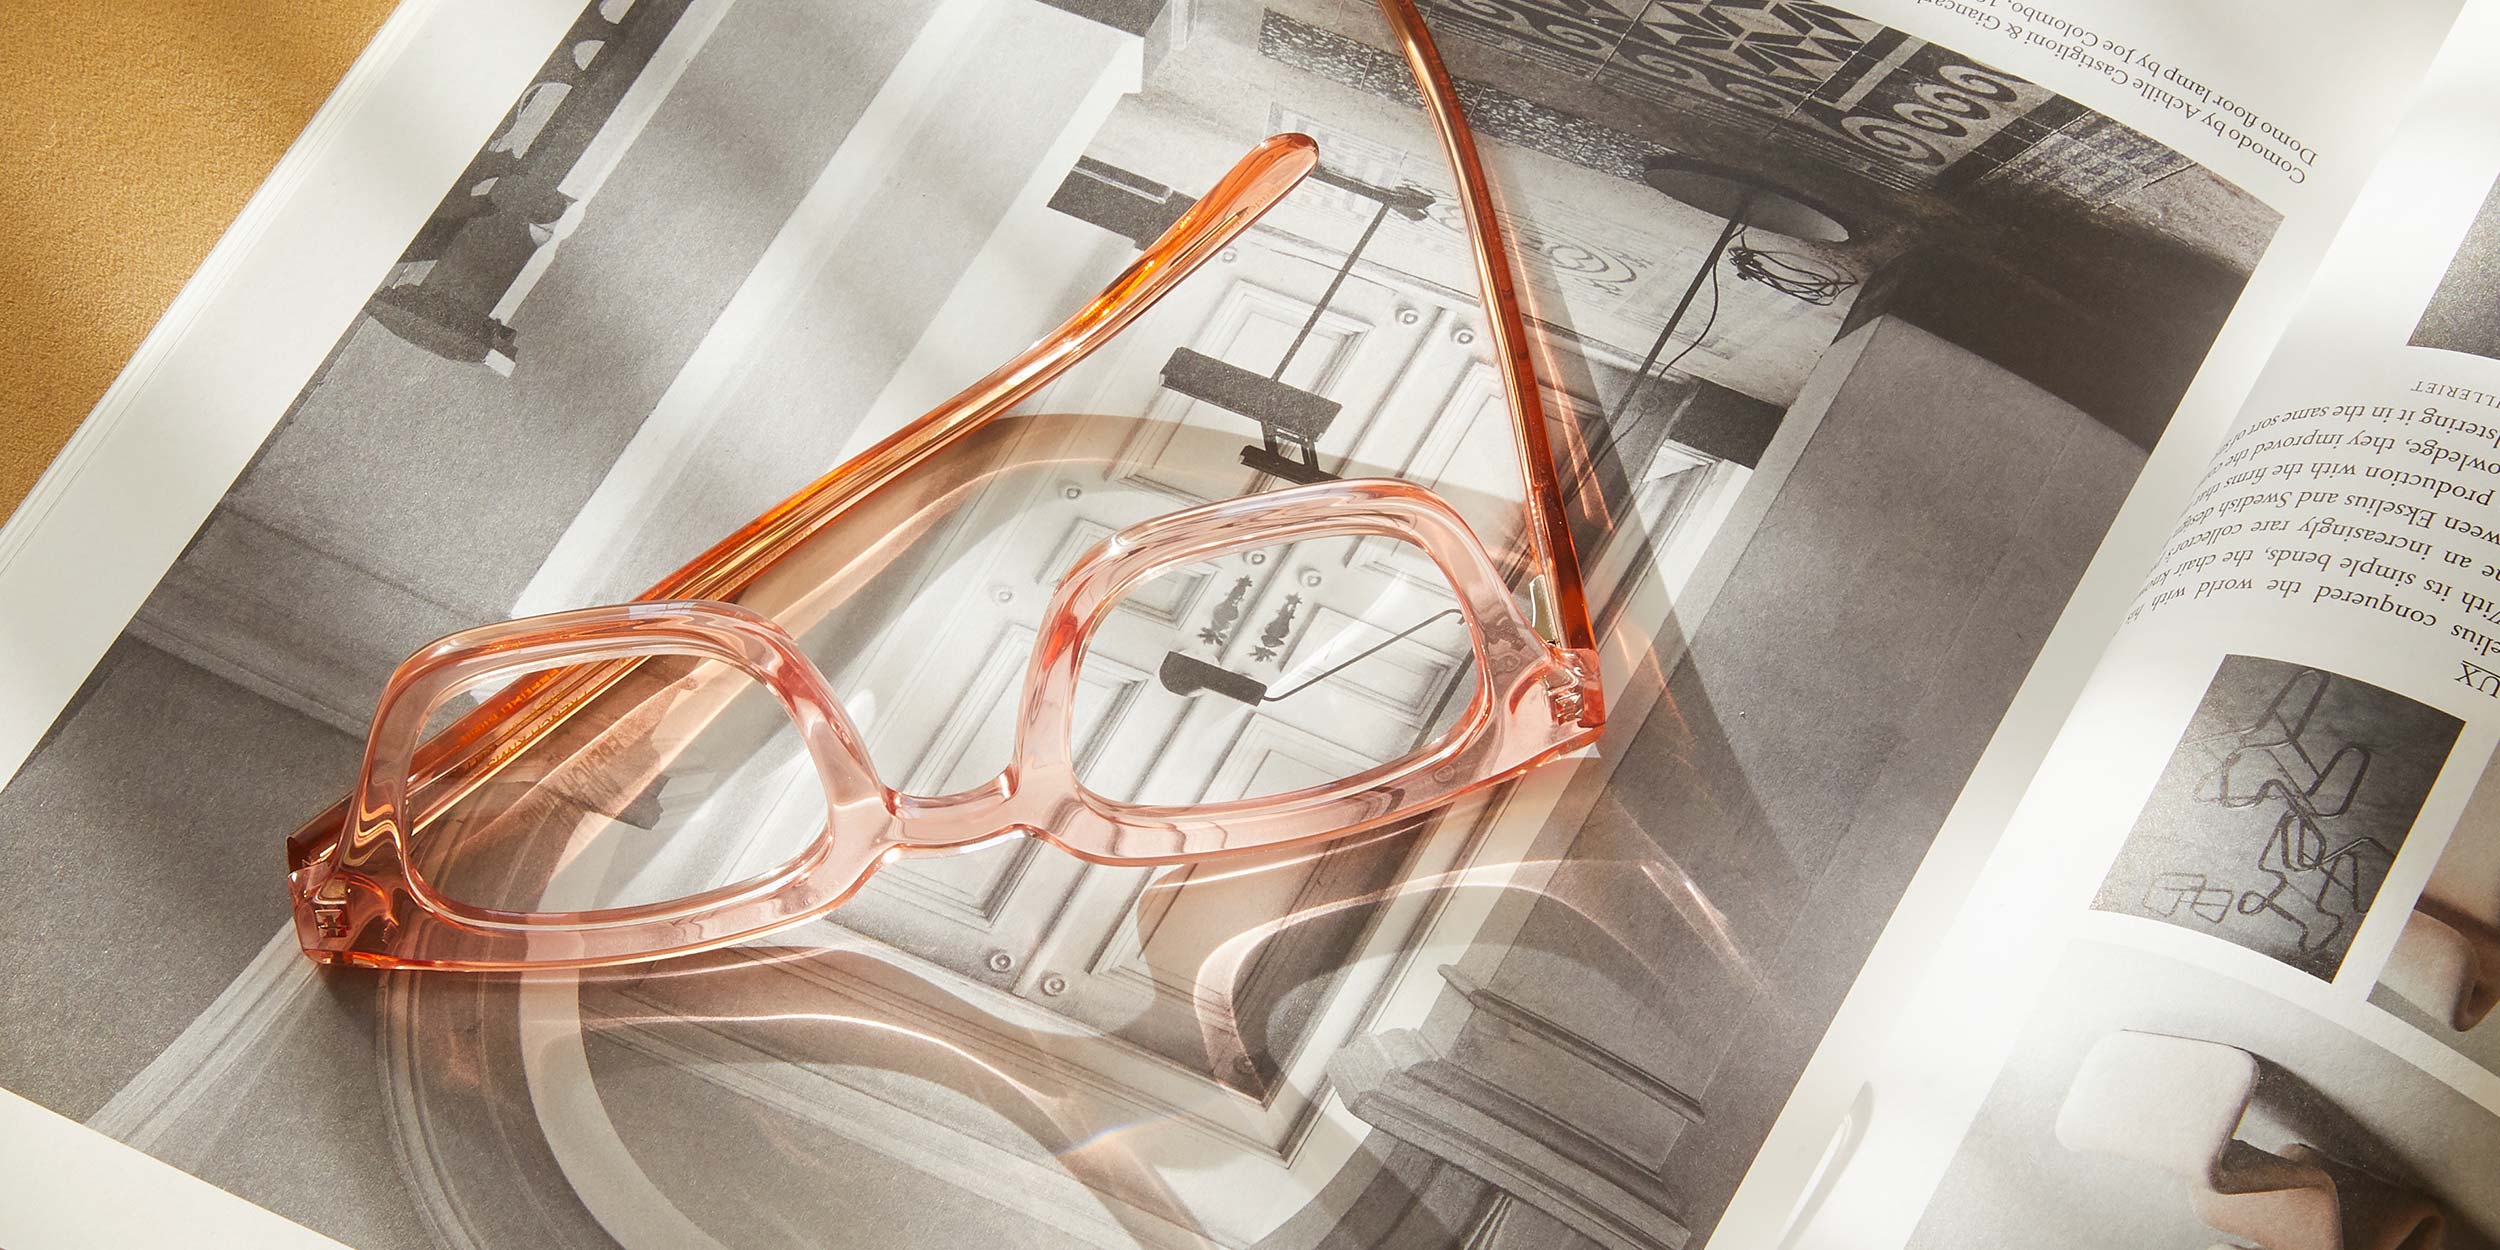 Photo Details of Ysée Rosé Reading Glasses in a room